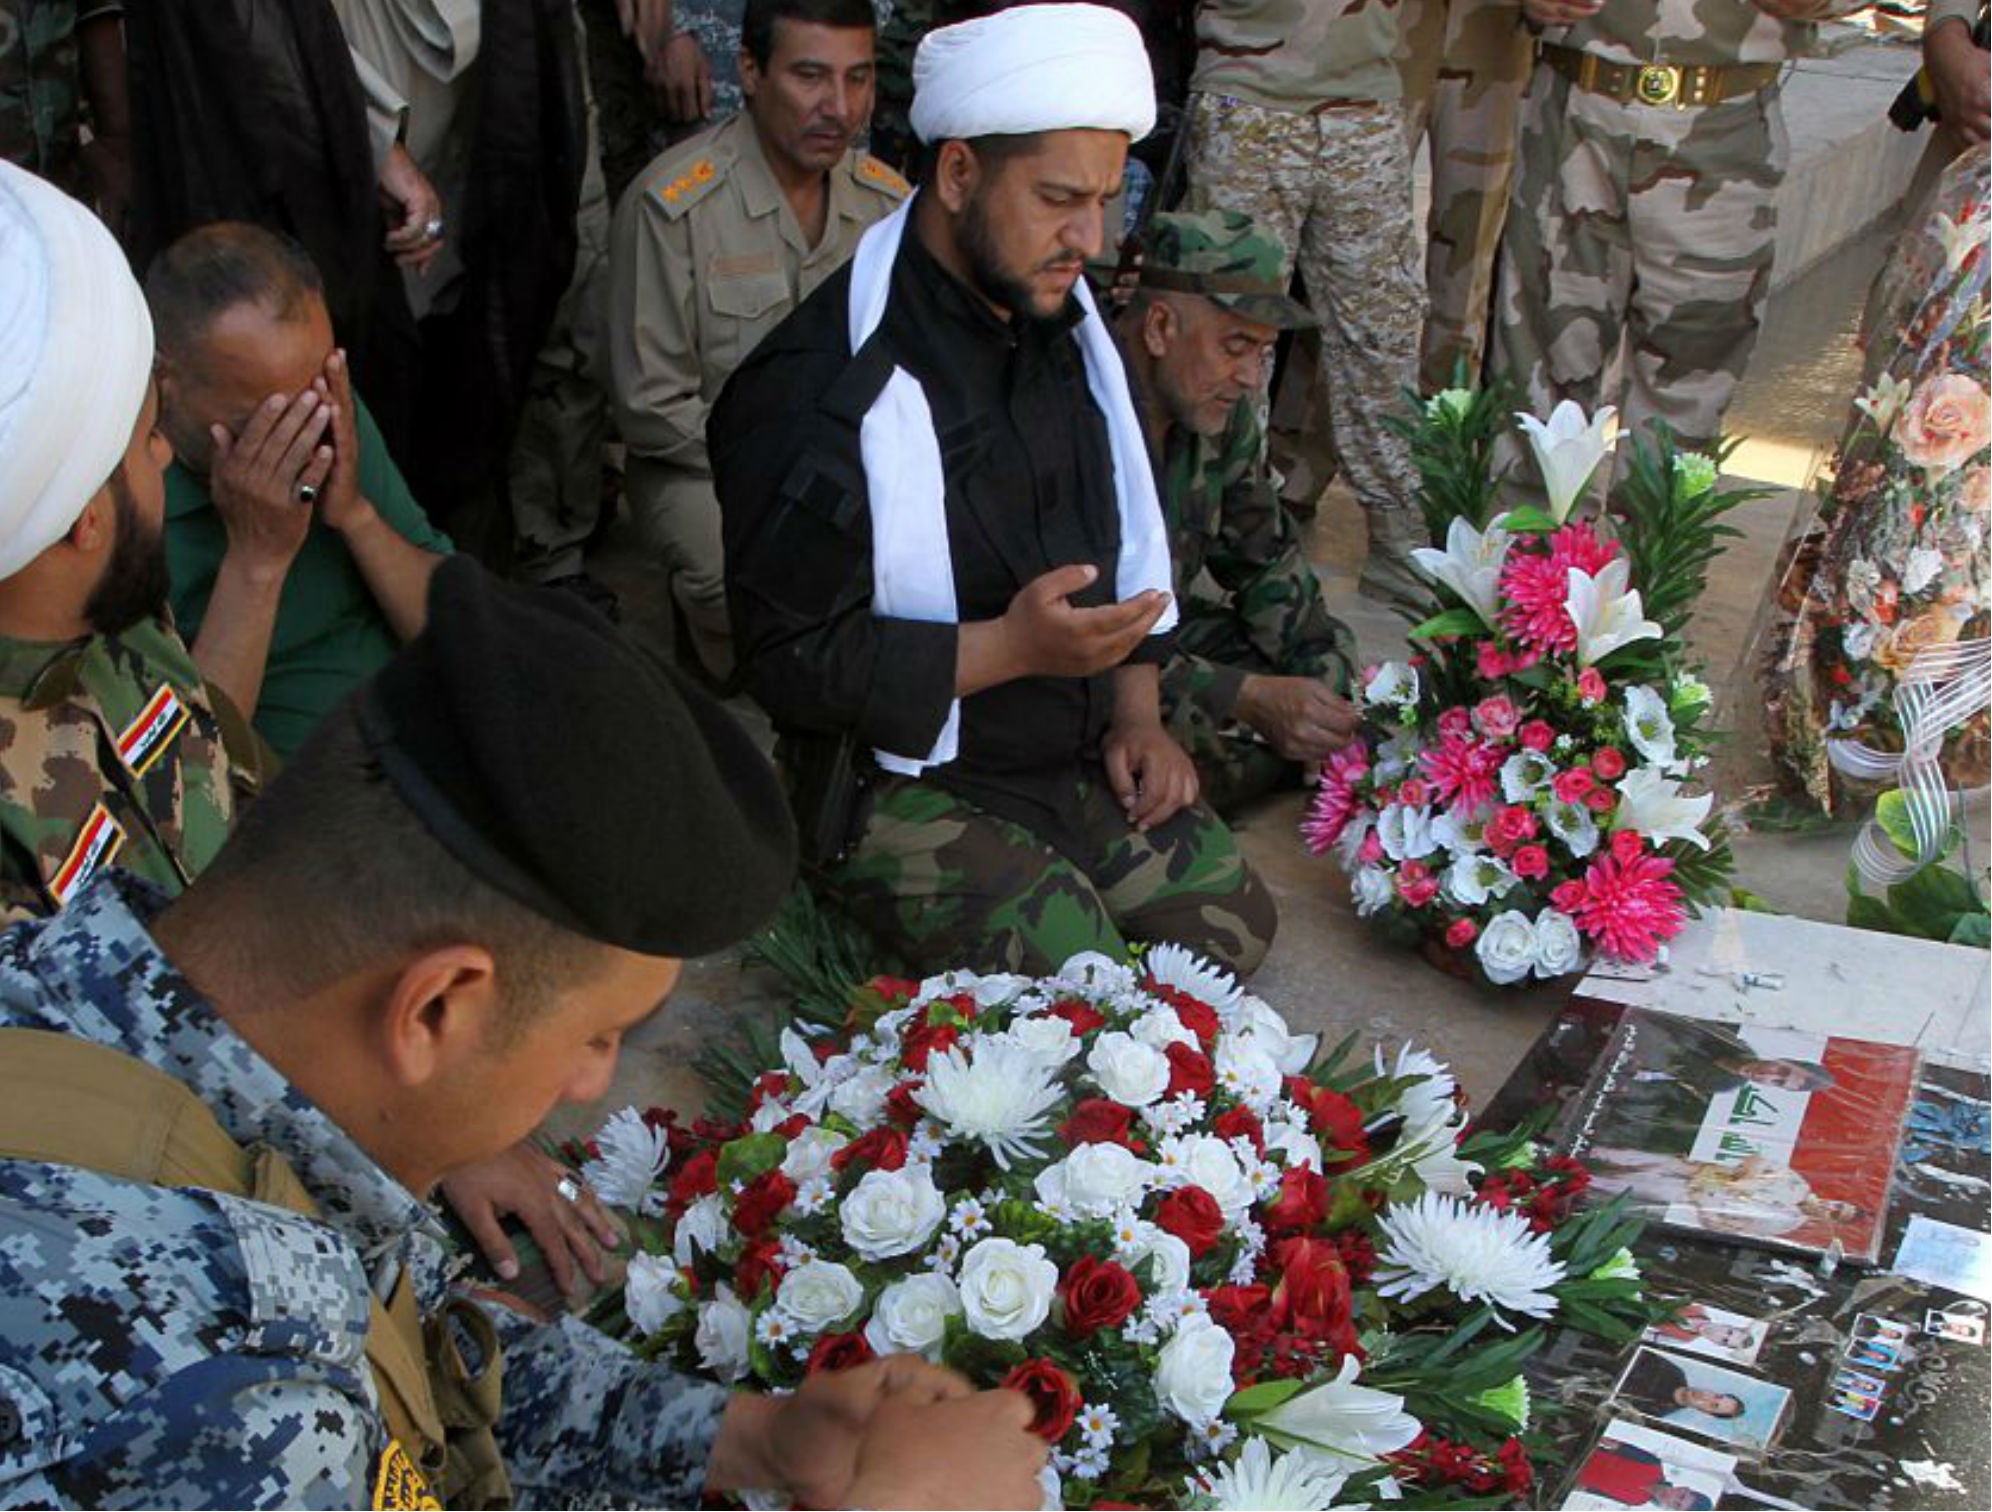 Mourners gather at the site of the 2014 massacre for which the Iraqi state has hanged 36 men